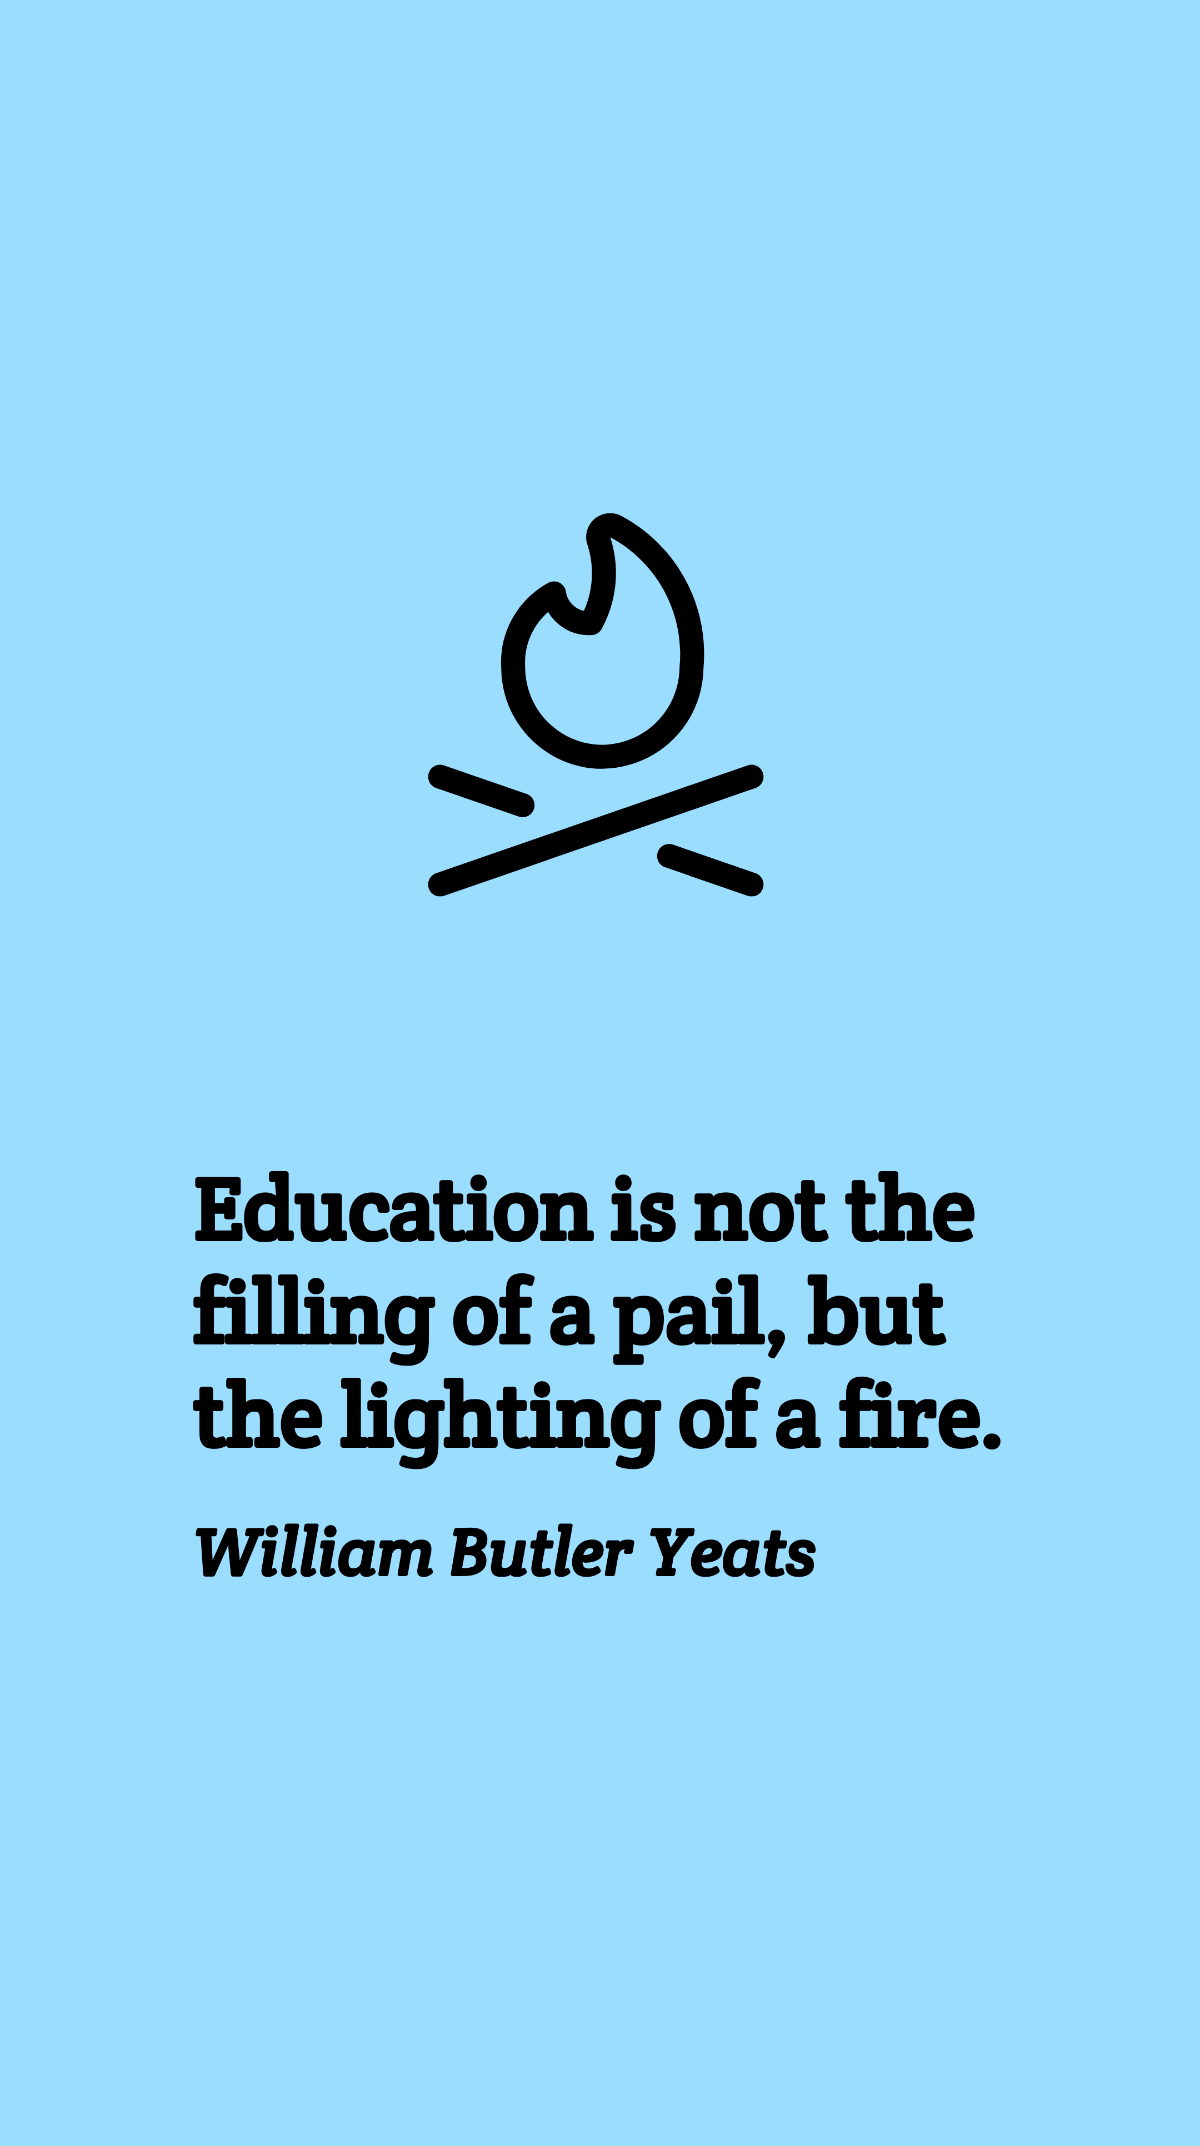 William Butler Yeats - Education is not the filling of a pail, but the lighting of a fire. Template